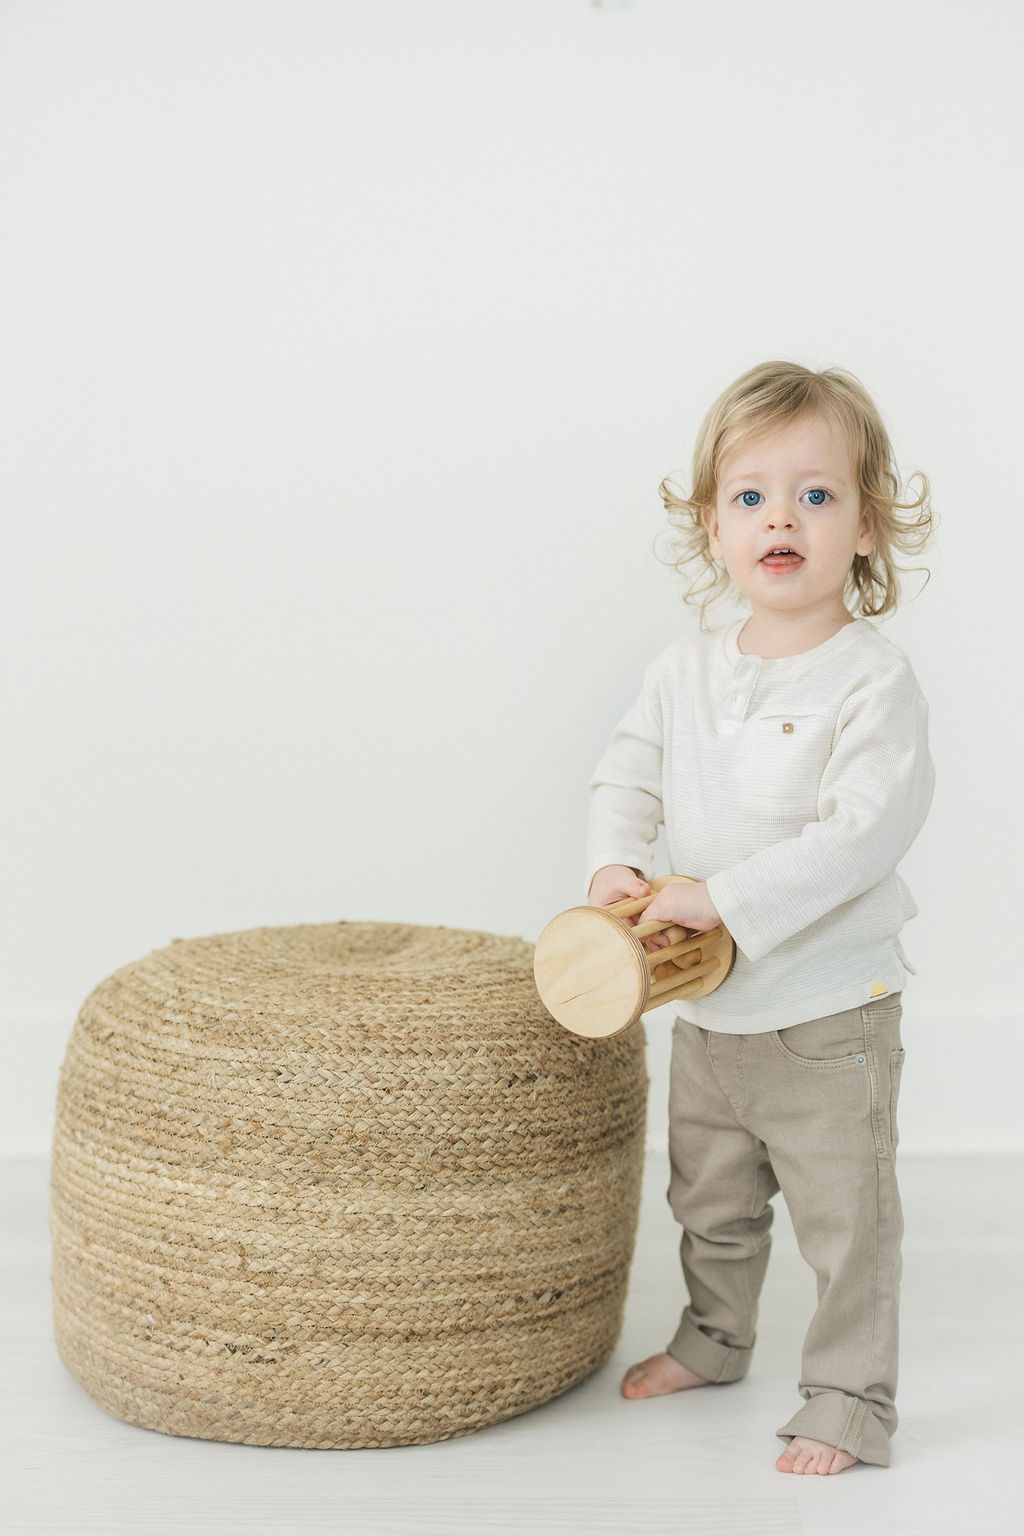 Toddler boy stands in khaki pants next to a woven stool and playing with a wooden toy over the moon montclair